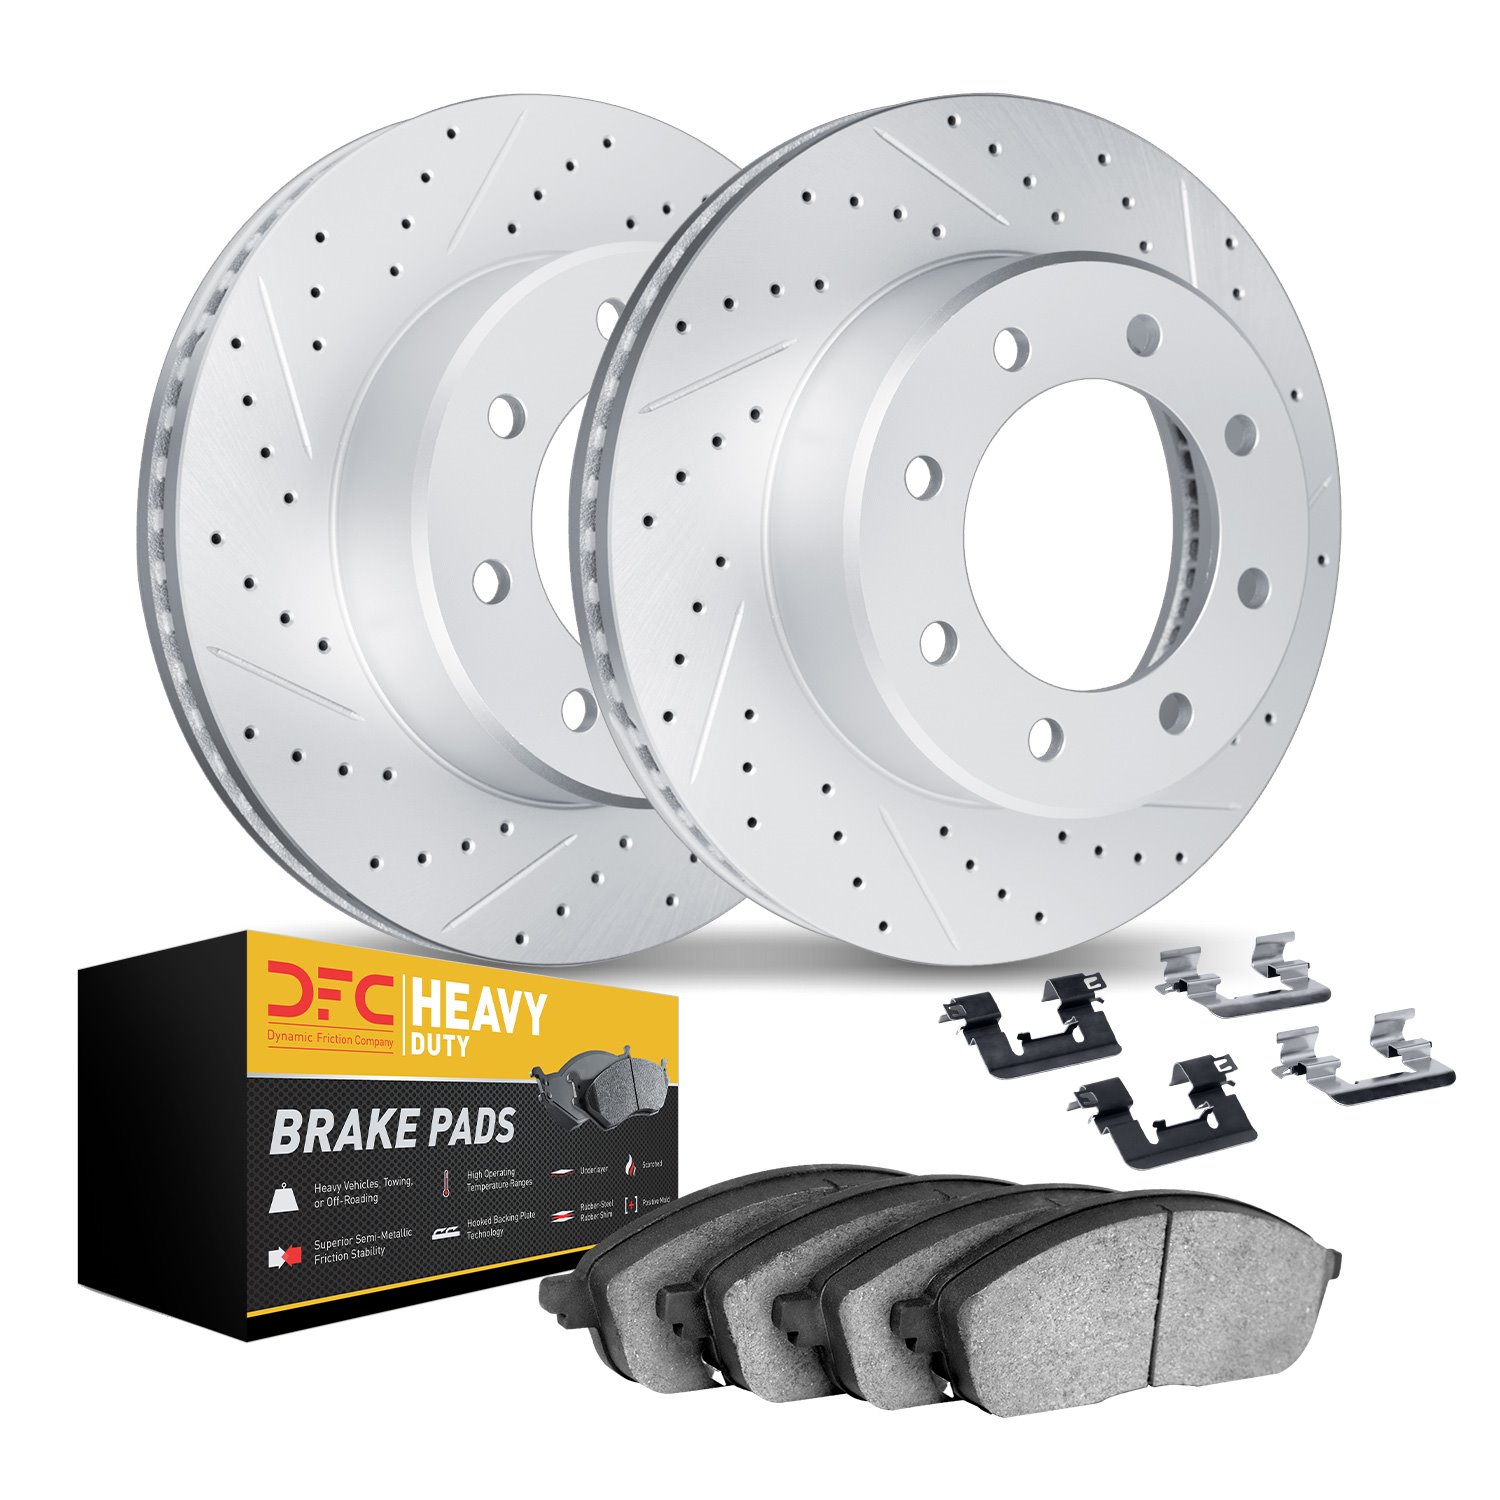 2212-99081 Geoperformance Drilled/Slotted Rotors w/Heavy-Duty Pads Kit & Hardware, 1995-2000 Ford/Lincoln/Mercury/Mazda, Positio